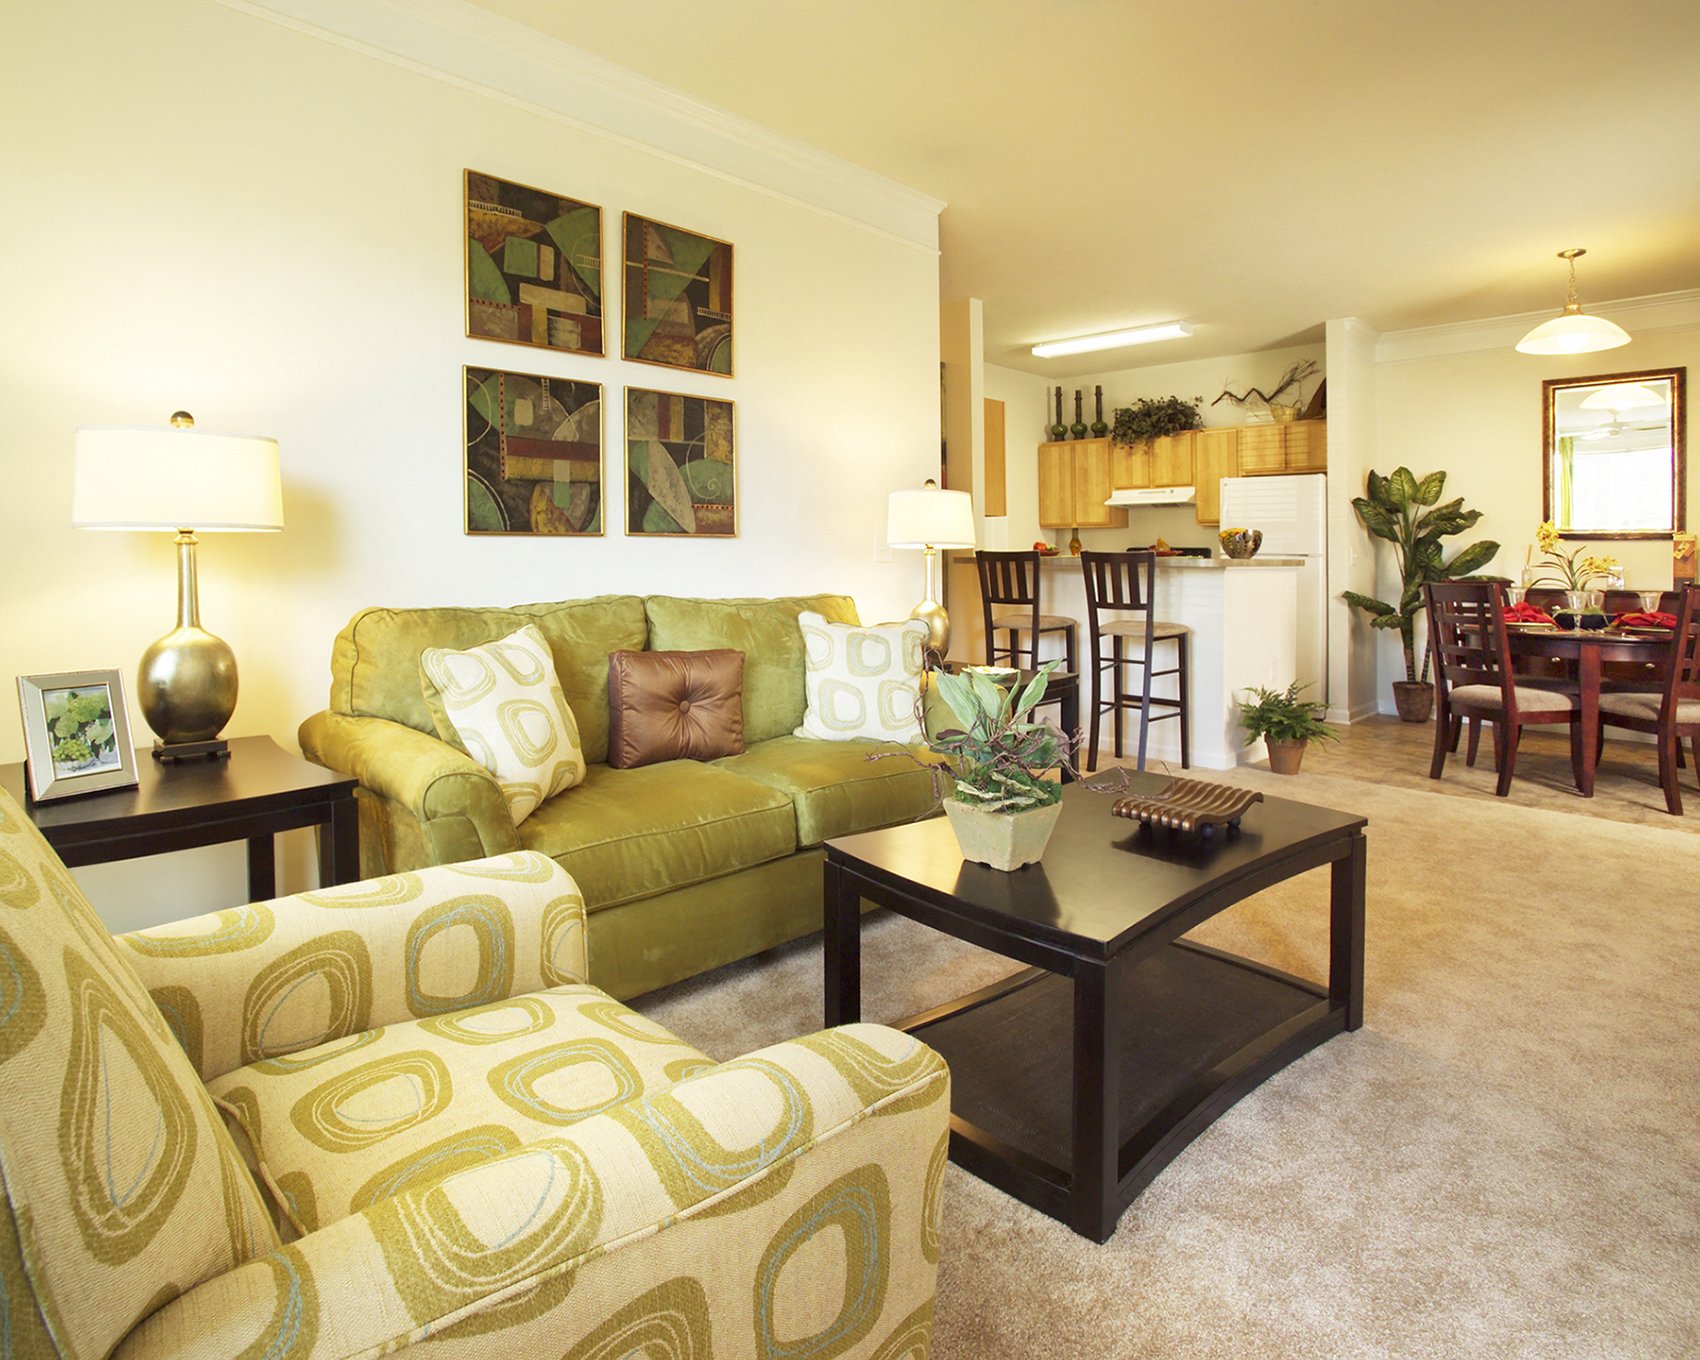 A decorated living room and dining table at the Magnolia Pointe Apartment Homes in Durham, North Carolina.